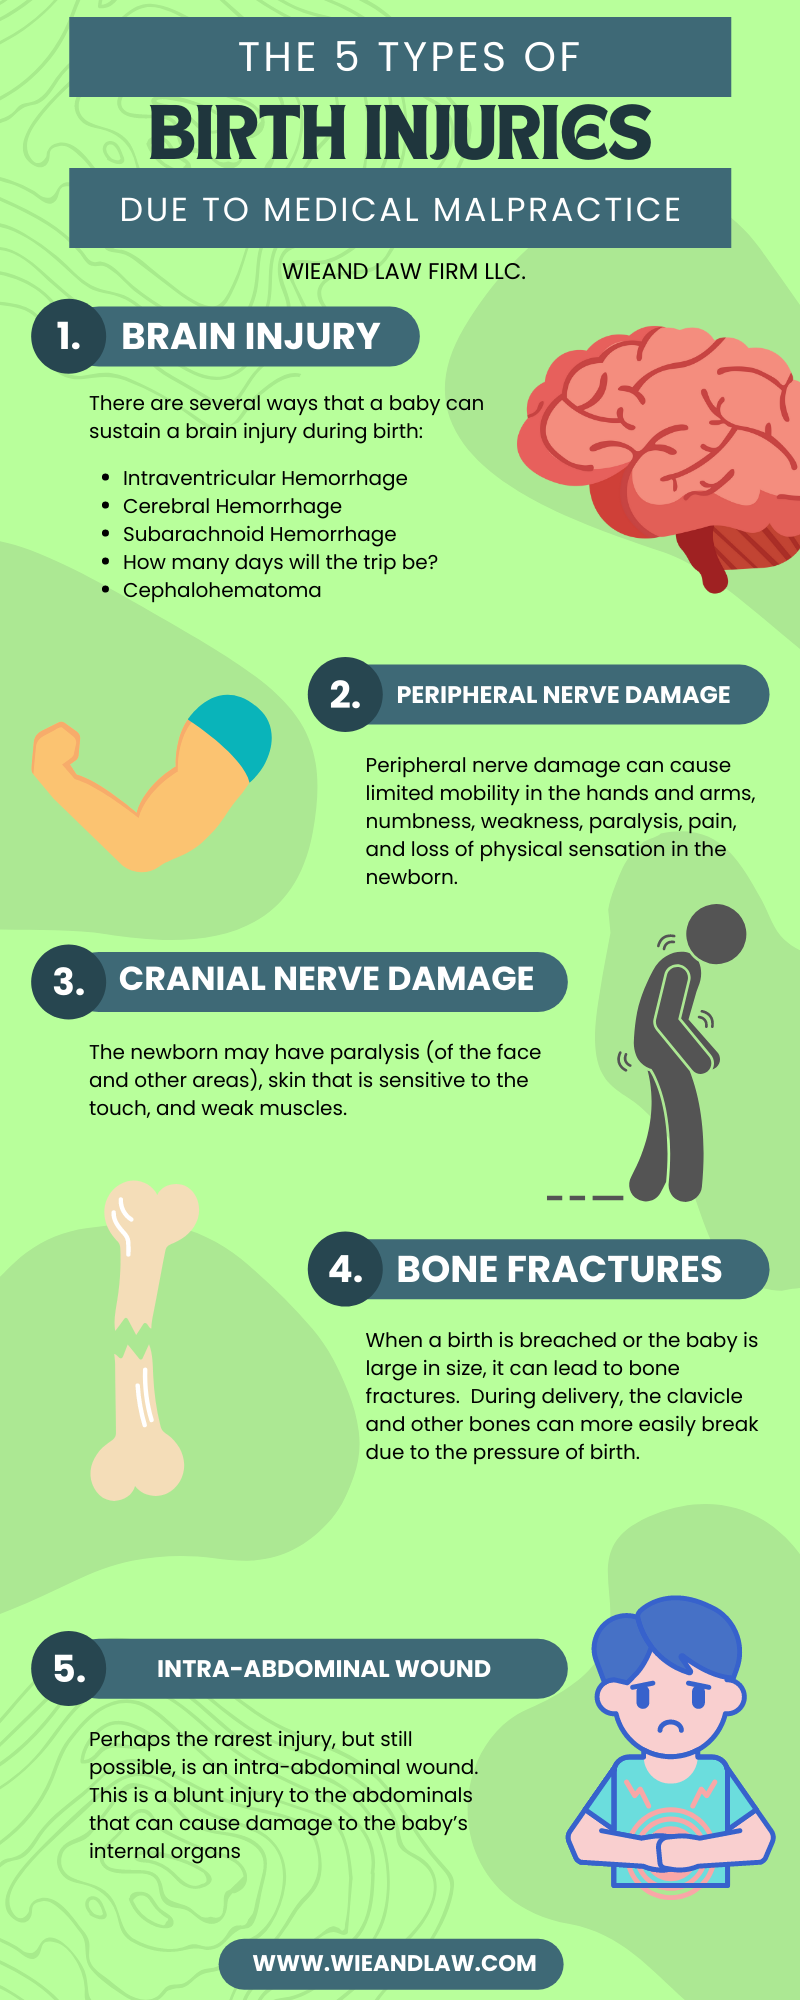 The 5 Types of Birth Injuries Due To Medical Malpractice Infographic